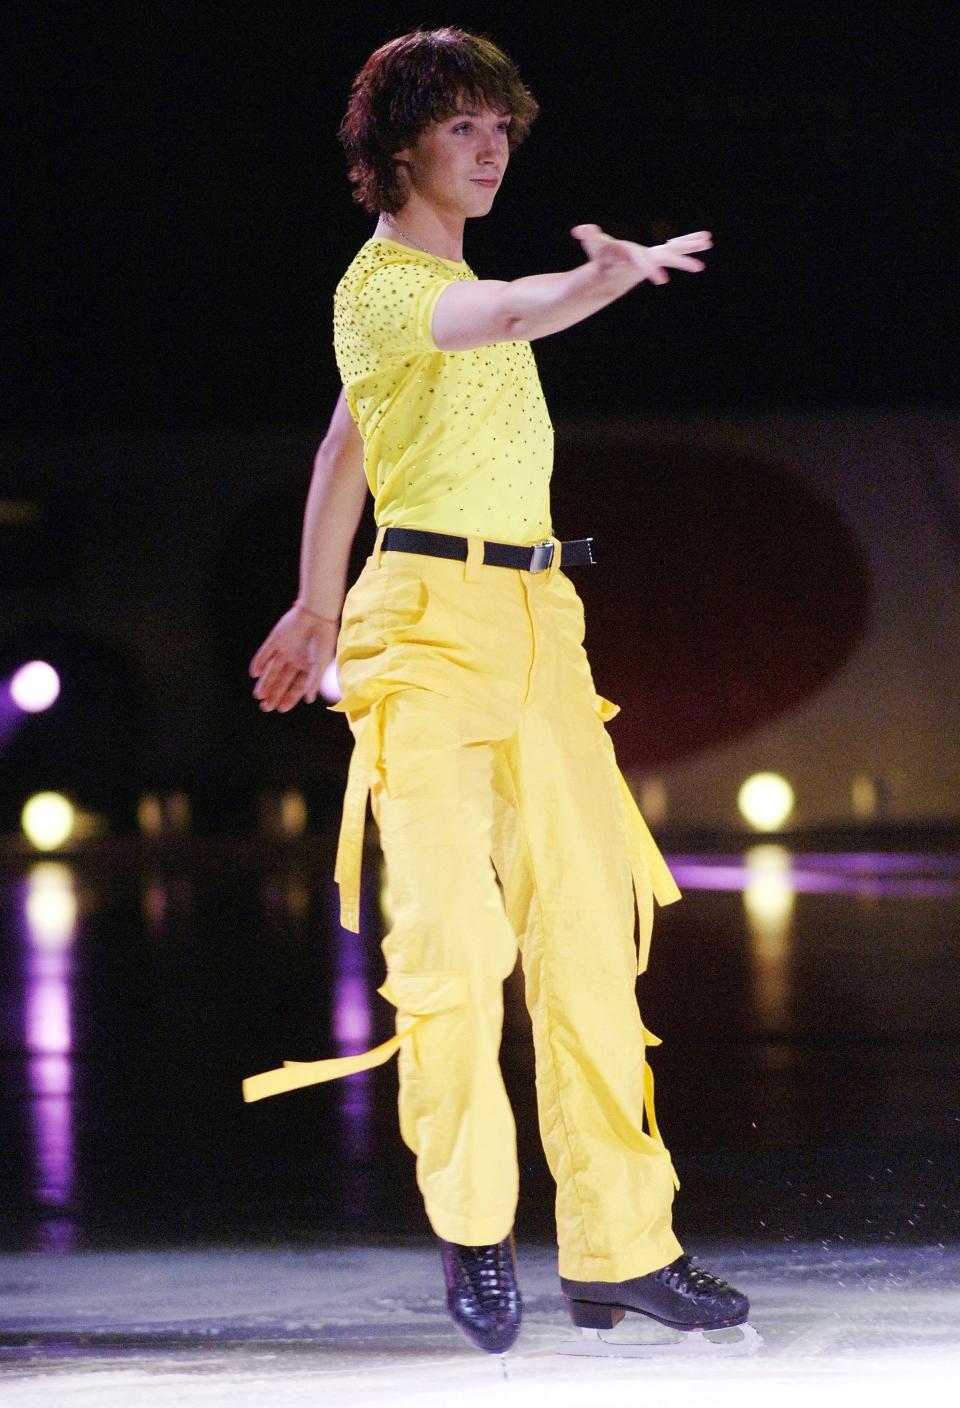 Performing&nbsp;as part of "Champions on Ice 2006" at the HP Pavilion on Aug. 5, 2006, in San Jose, California.